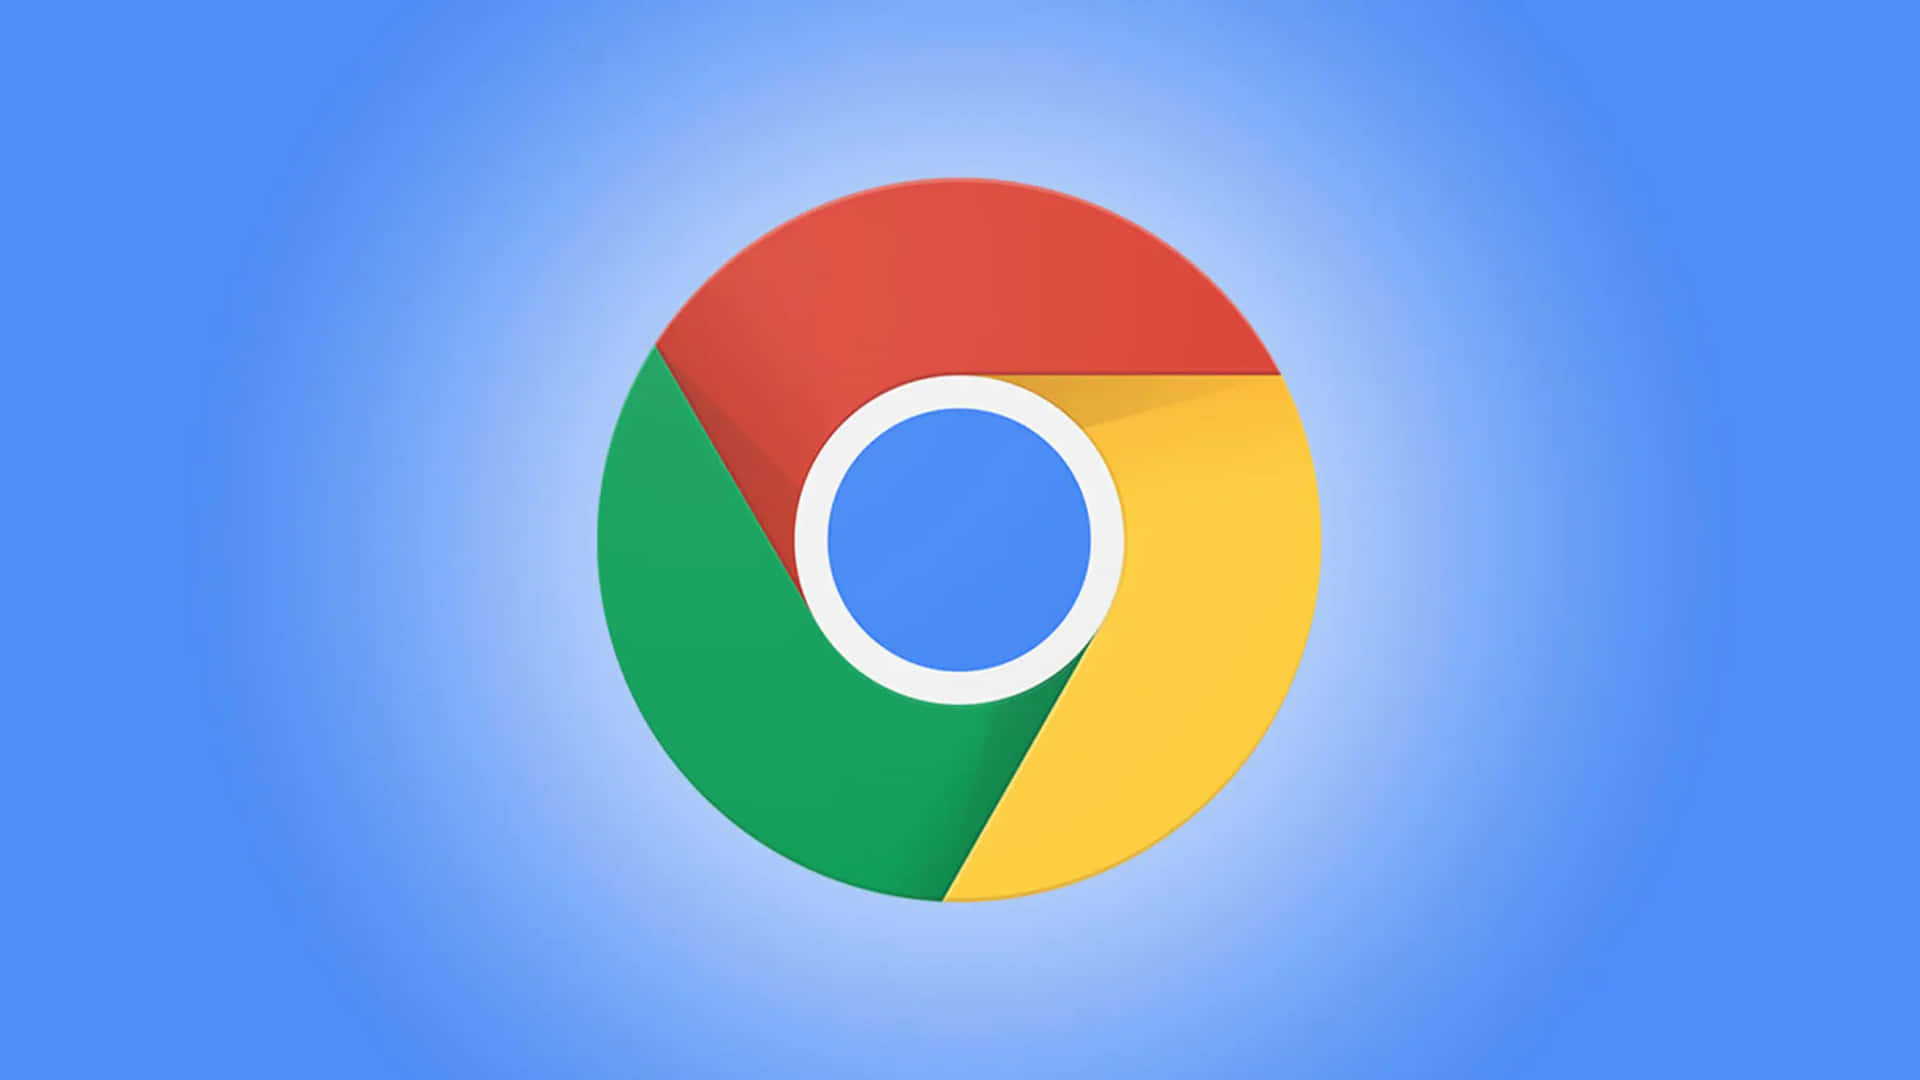 Get the most out of your web-browsing experience with Google Chrome